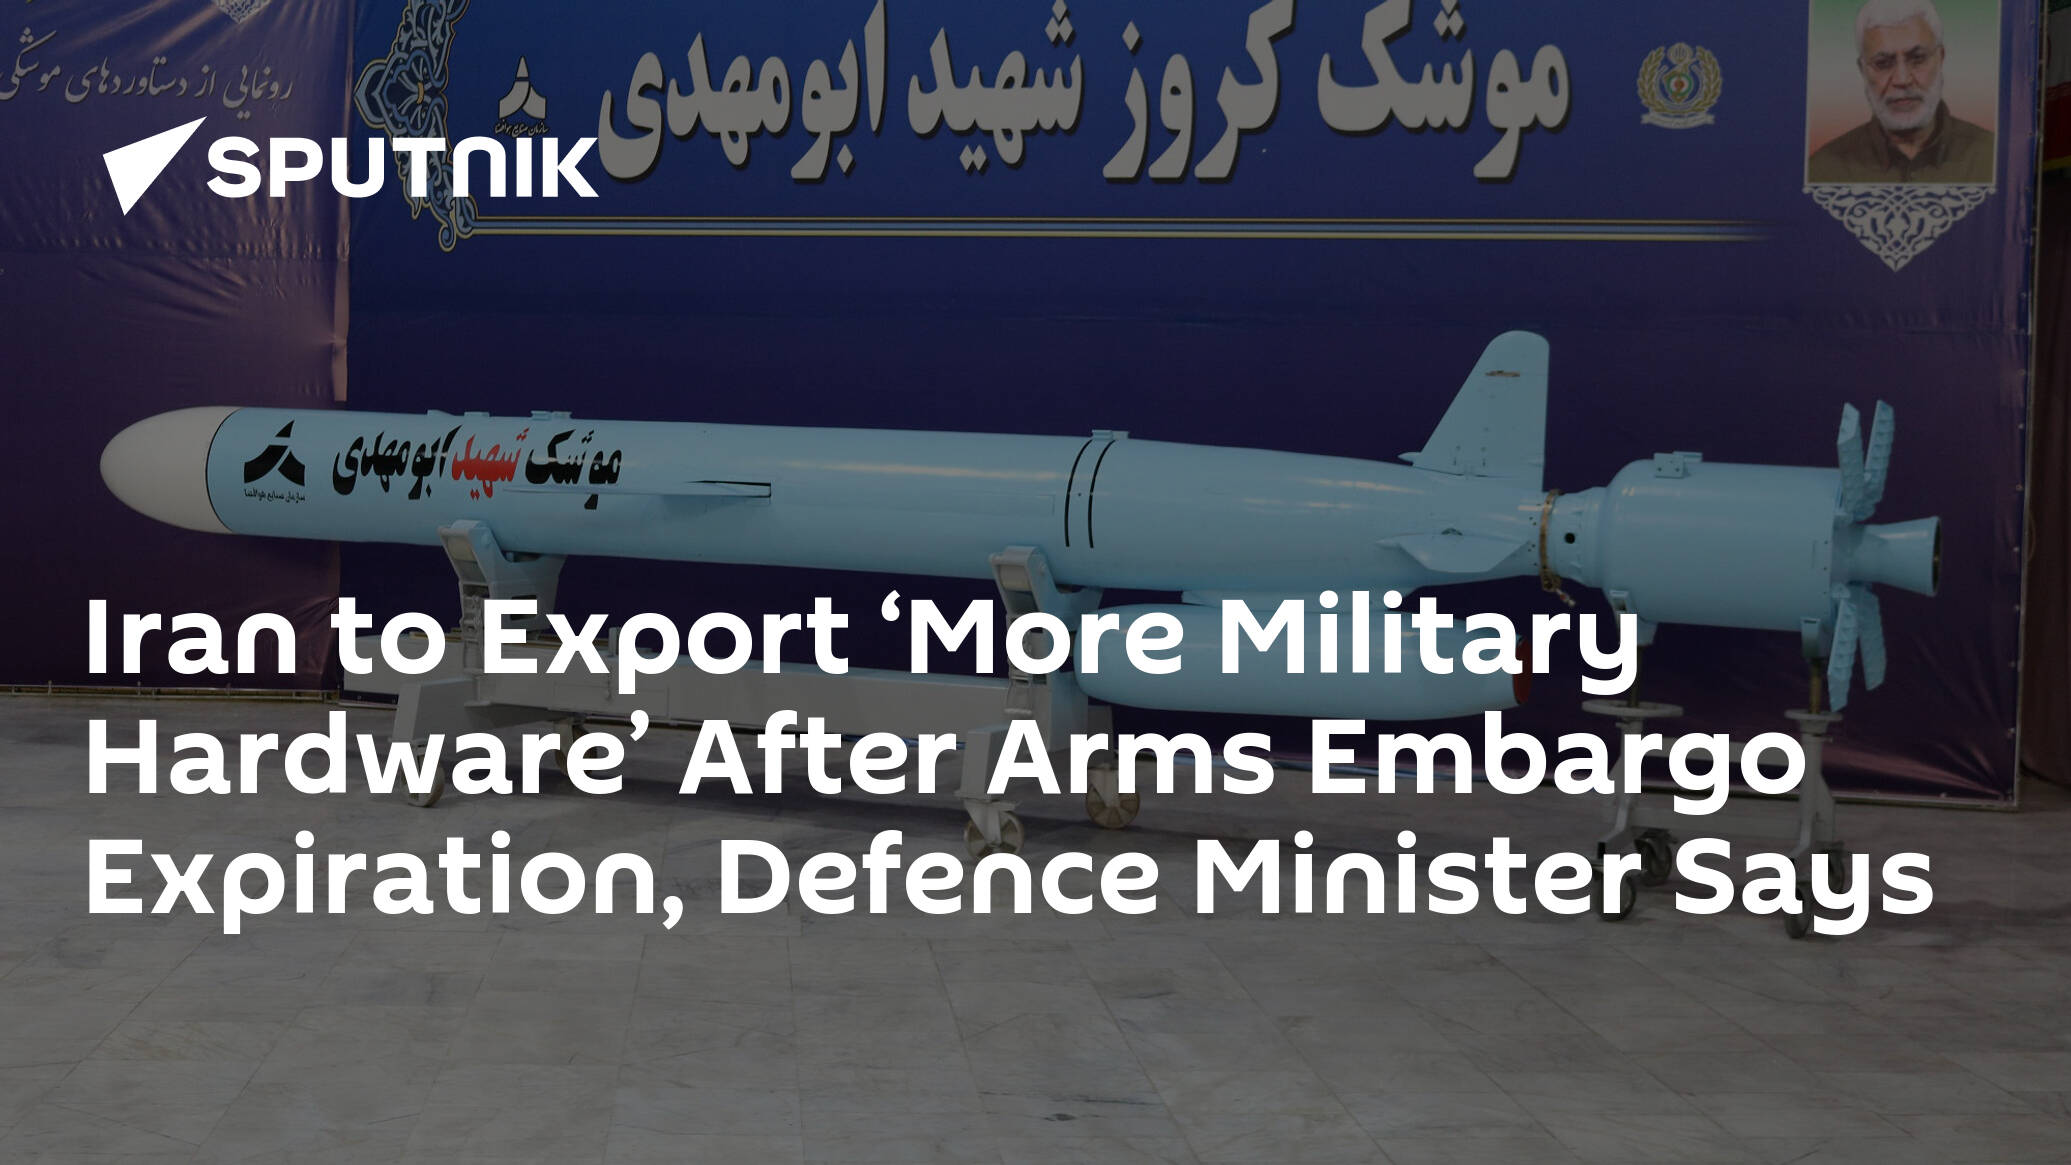 Iran to Export 'More Military Hardware' After Arms Embargo Expiration,  Defence Minister Says - 05.09.2020, Sputnik International